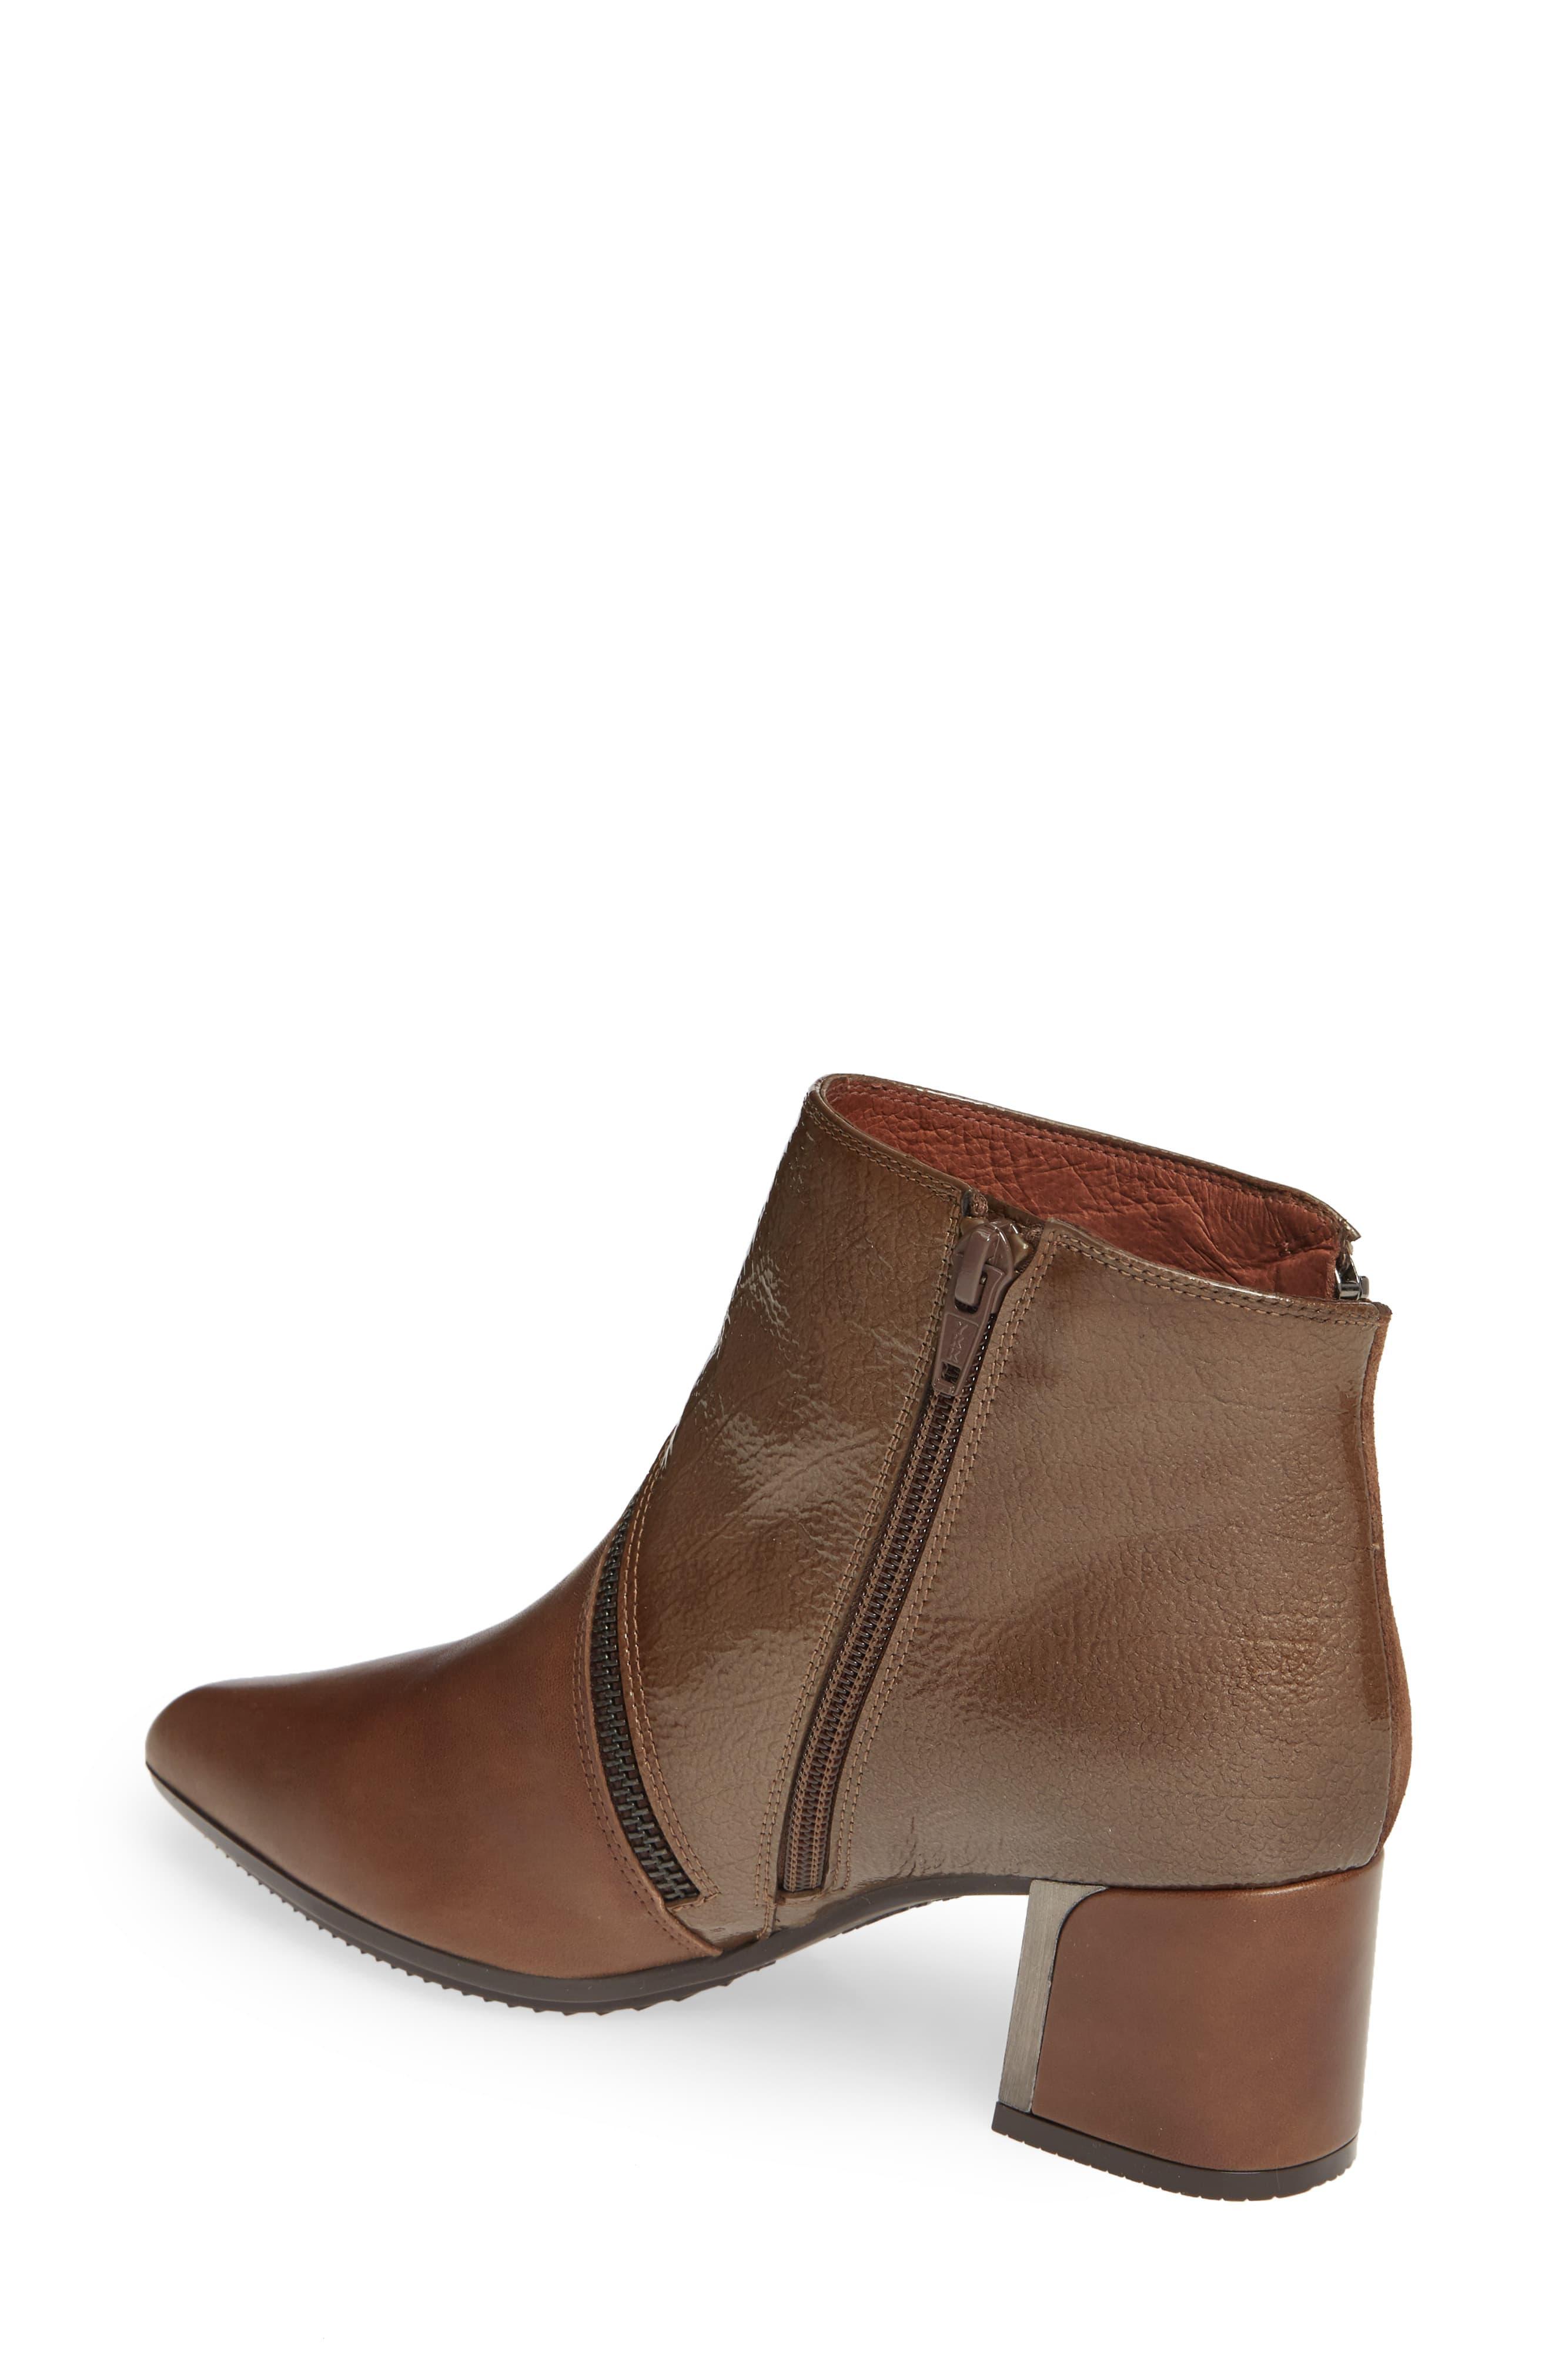 Hispanitas Alondra Bootie in Taupe Leather (Brown) - Lyst